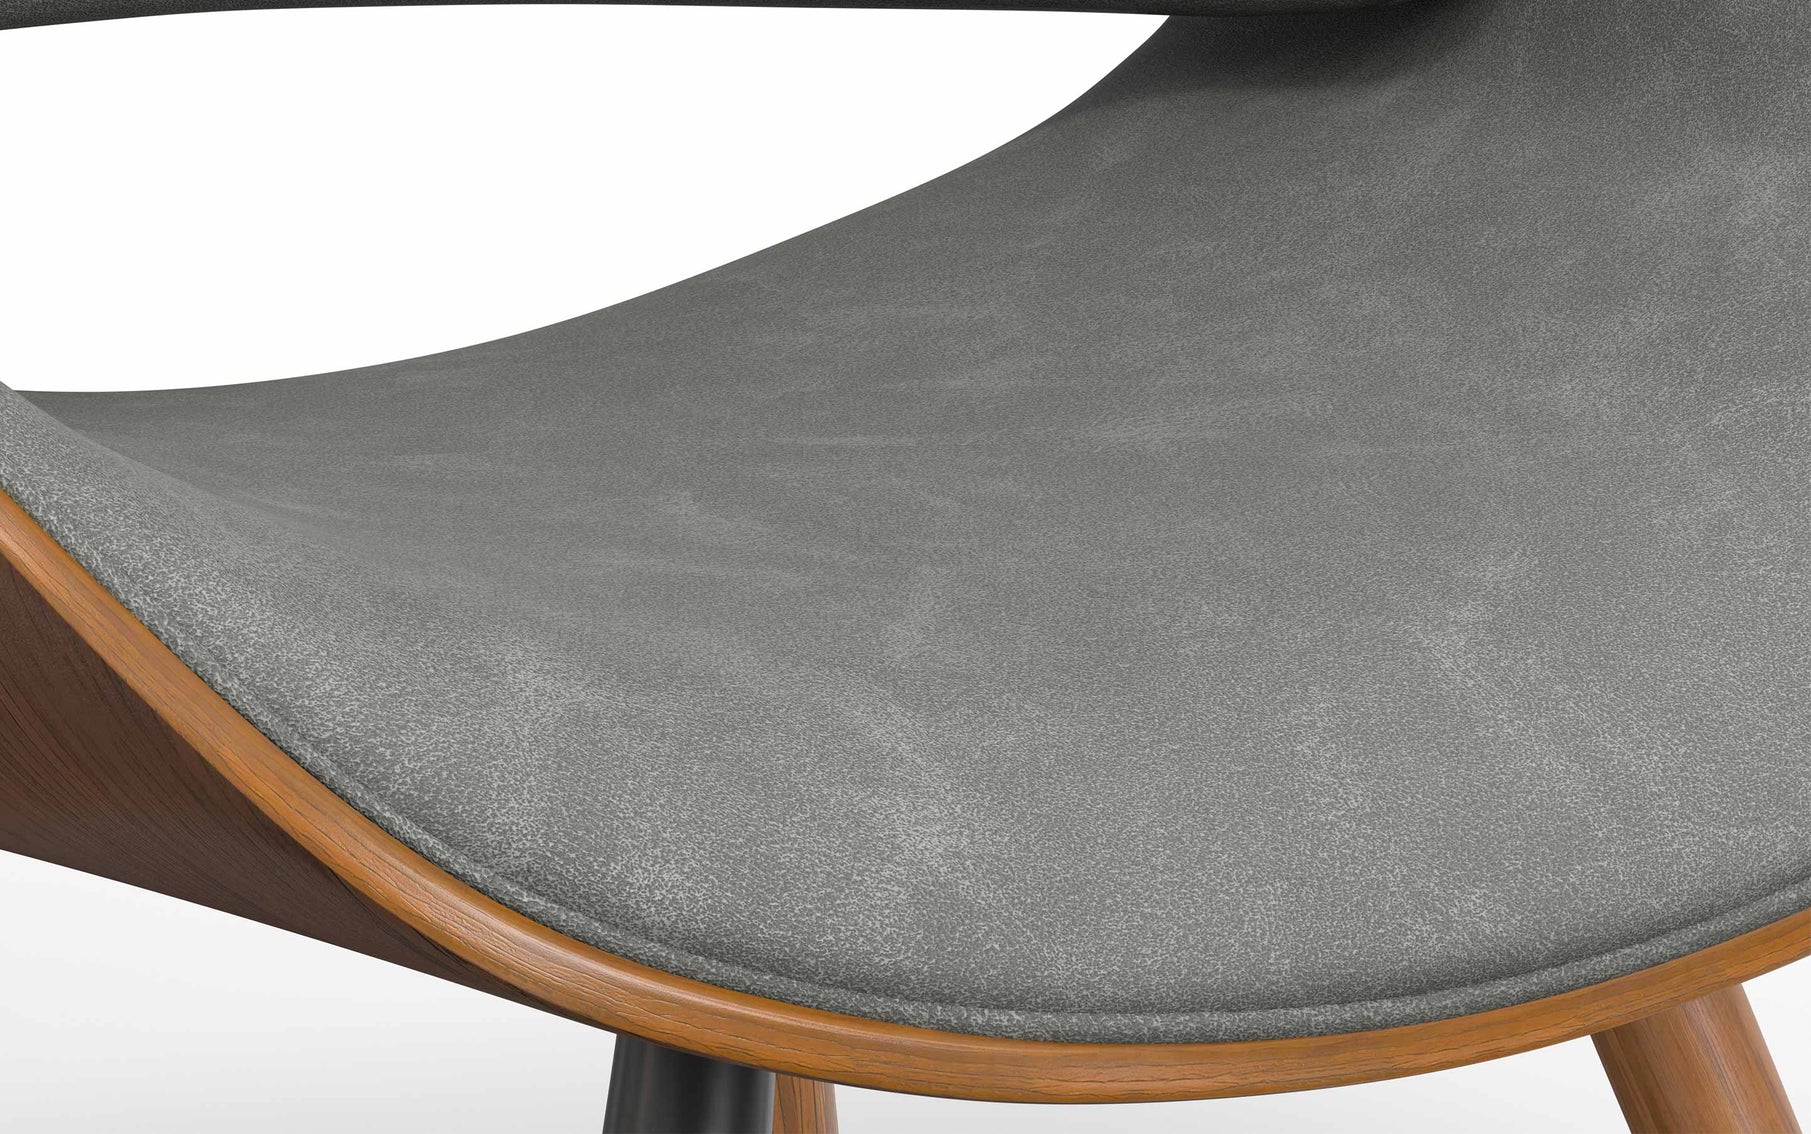 Distressed Grey Walnut Distressed Vegan Leather | Malden Dining Chair with Wood Back